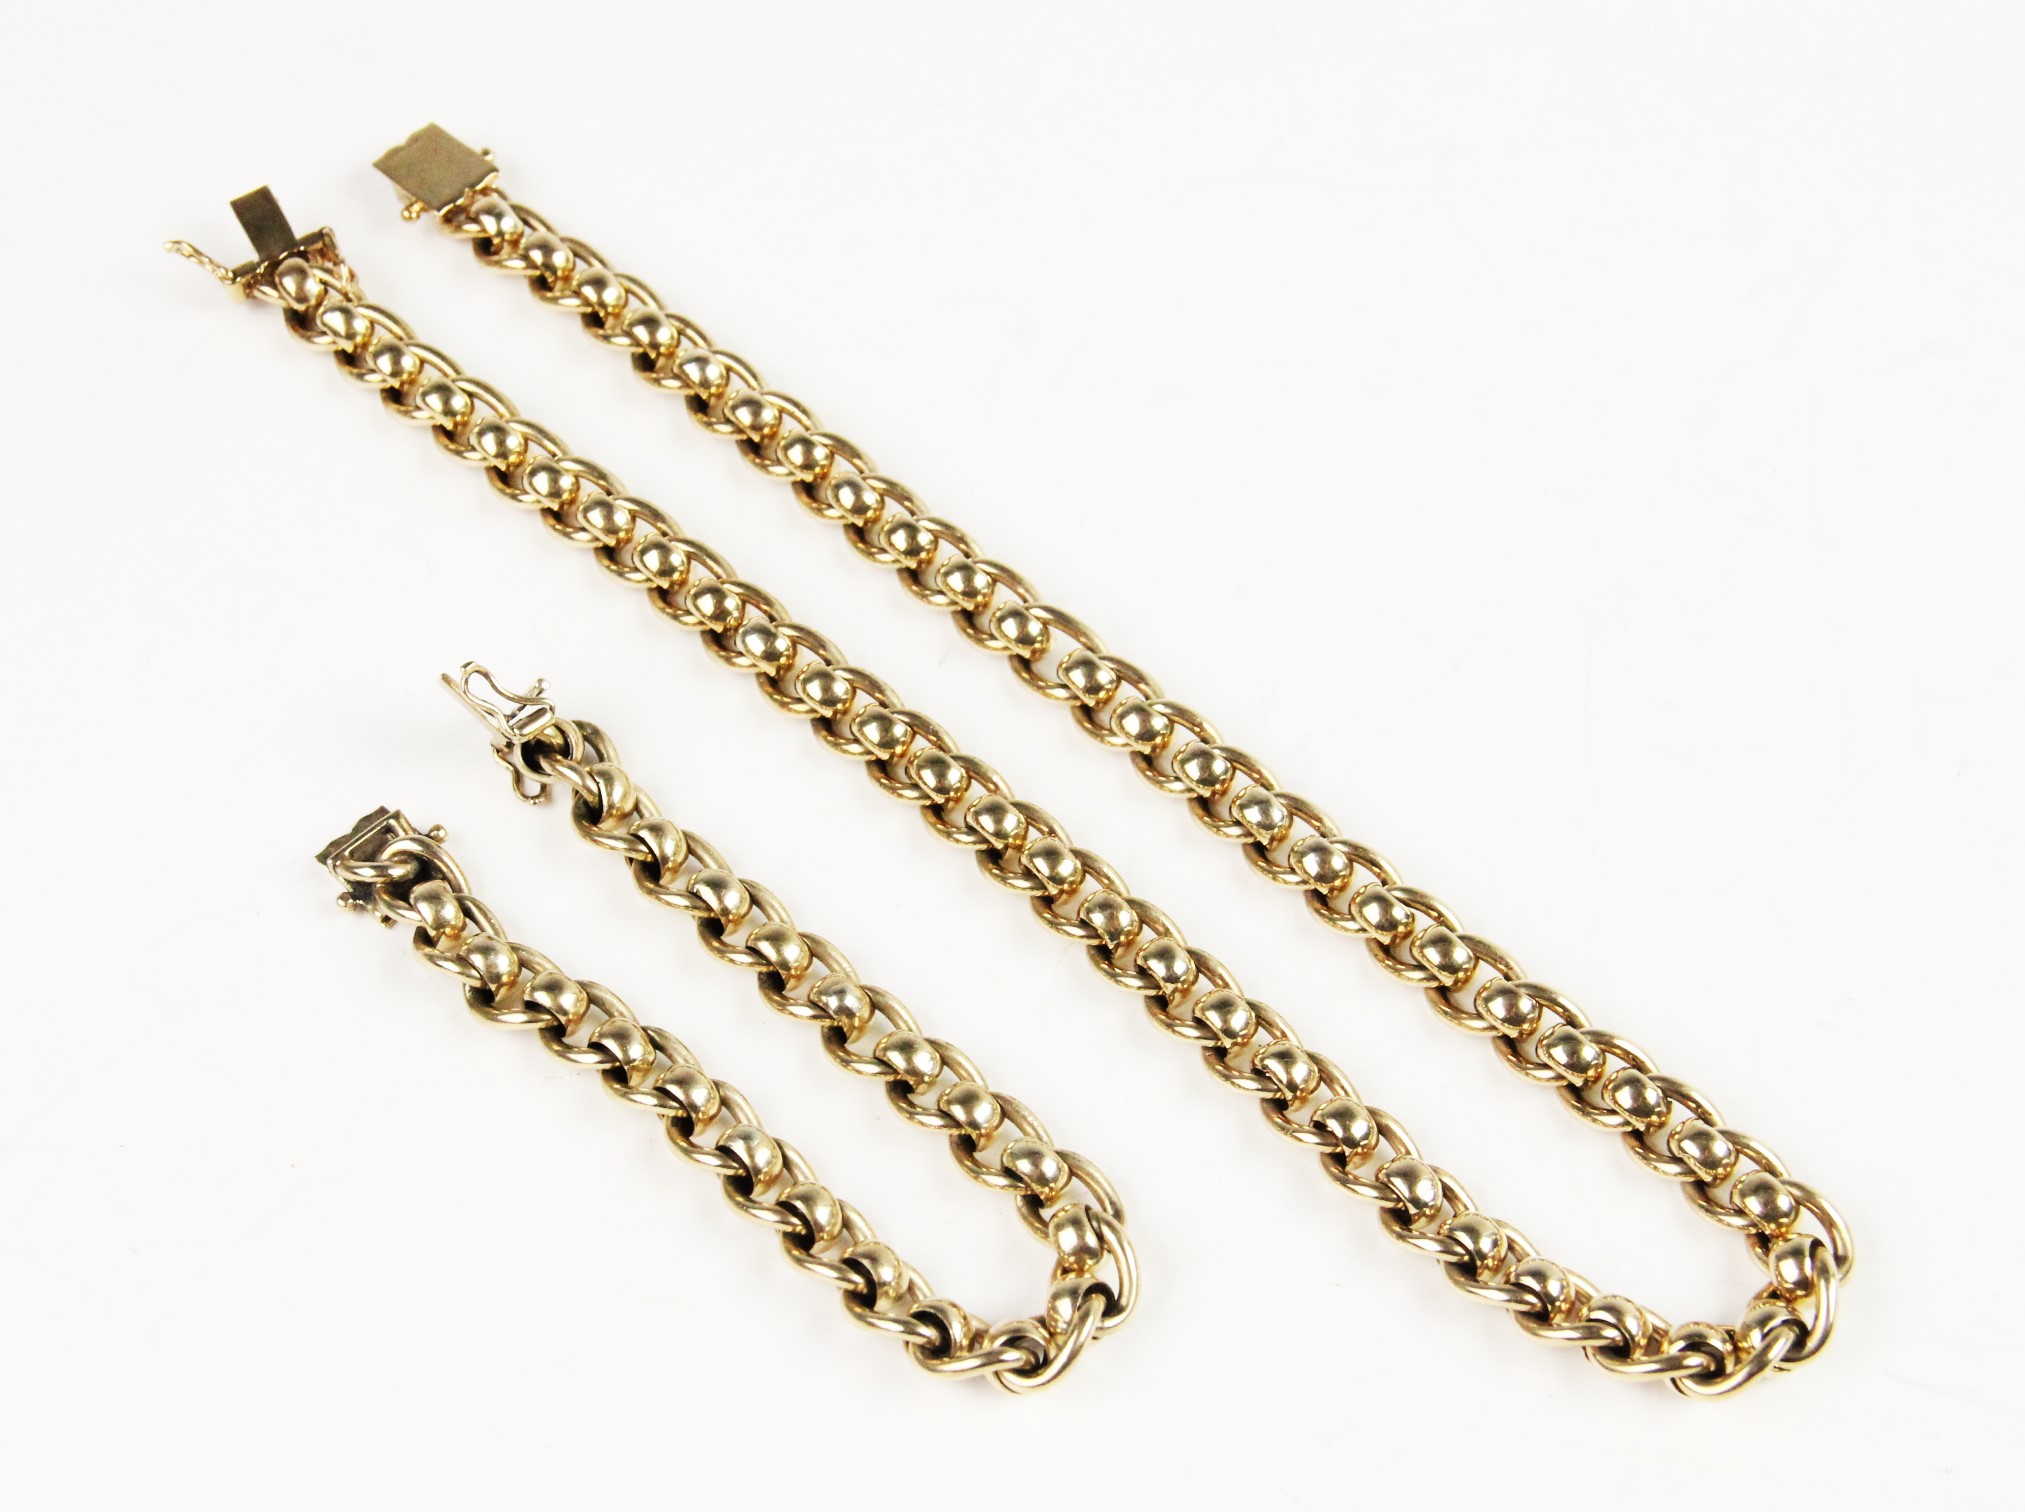 A 9ct gold curb link necklace and bracelet